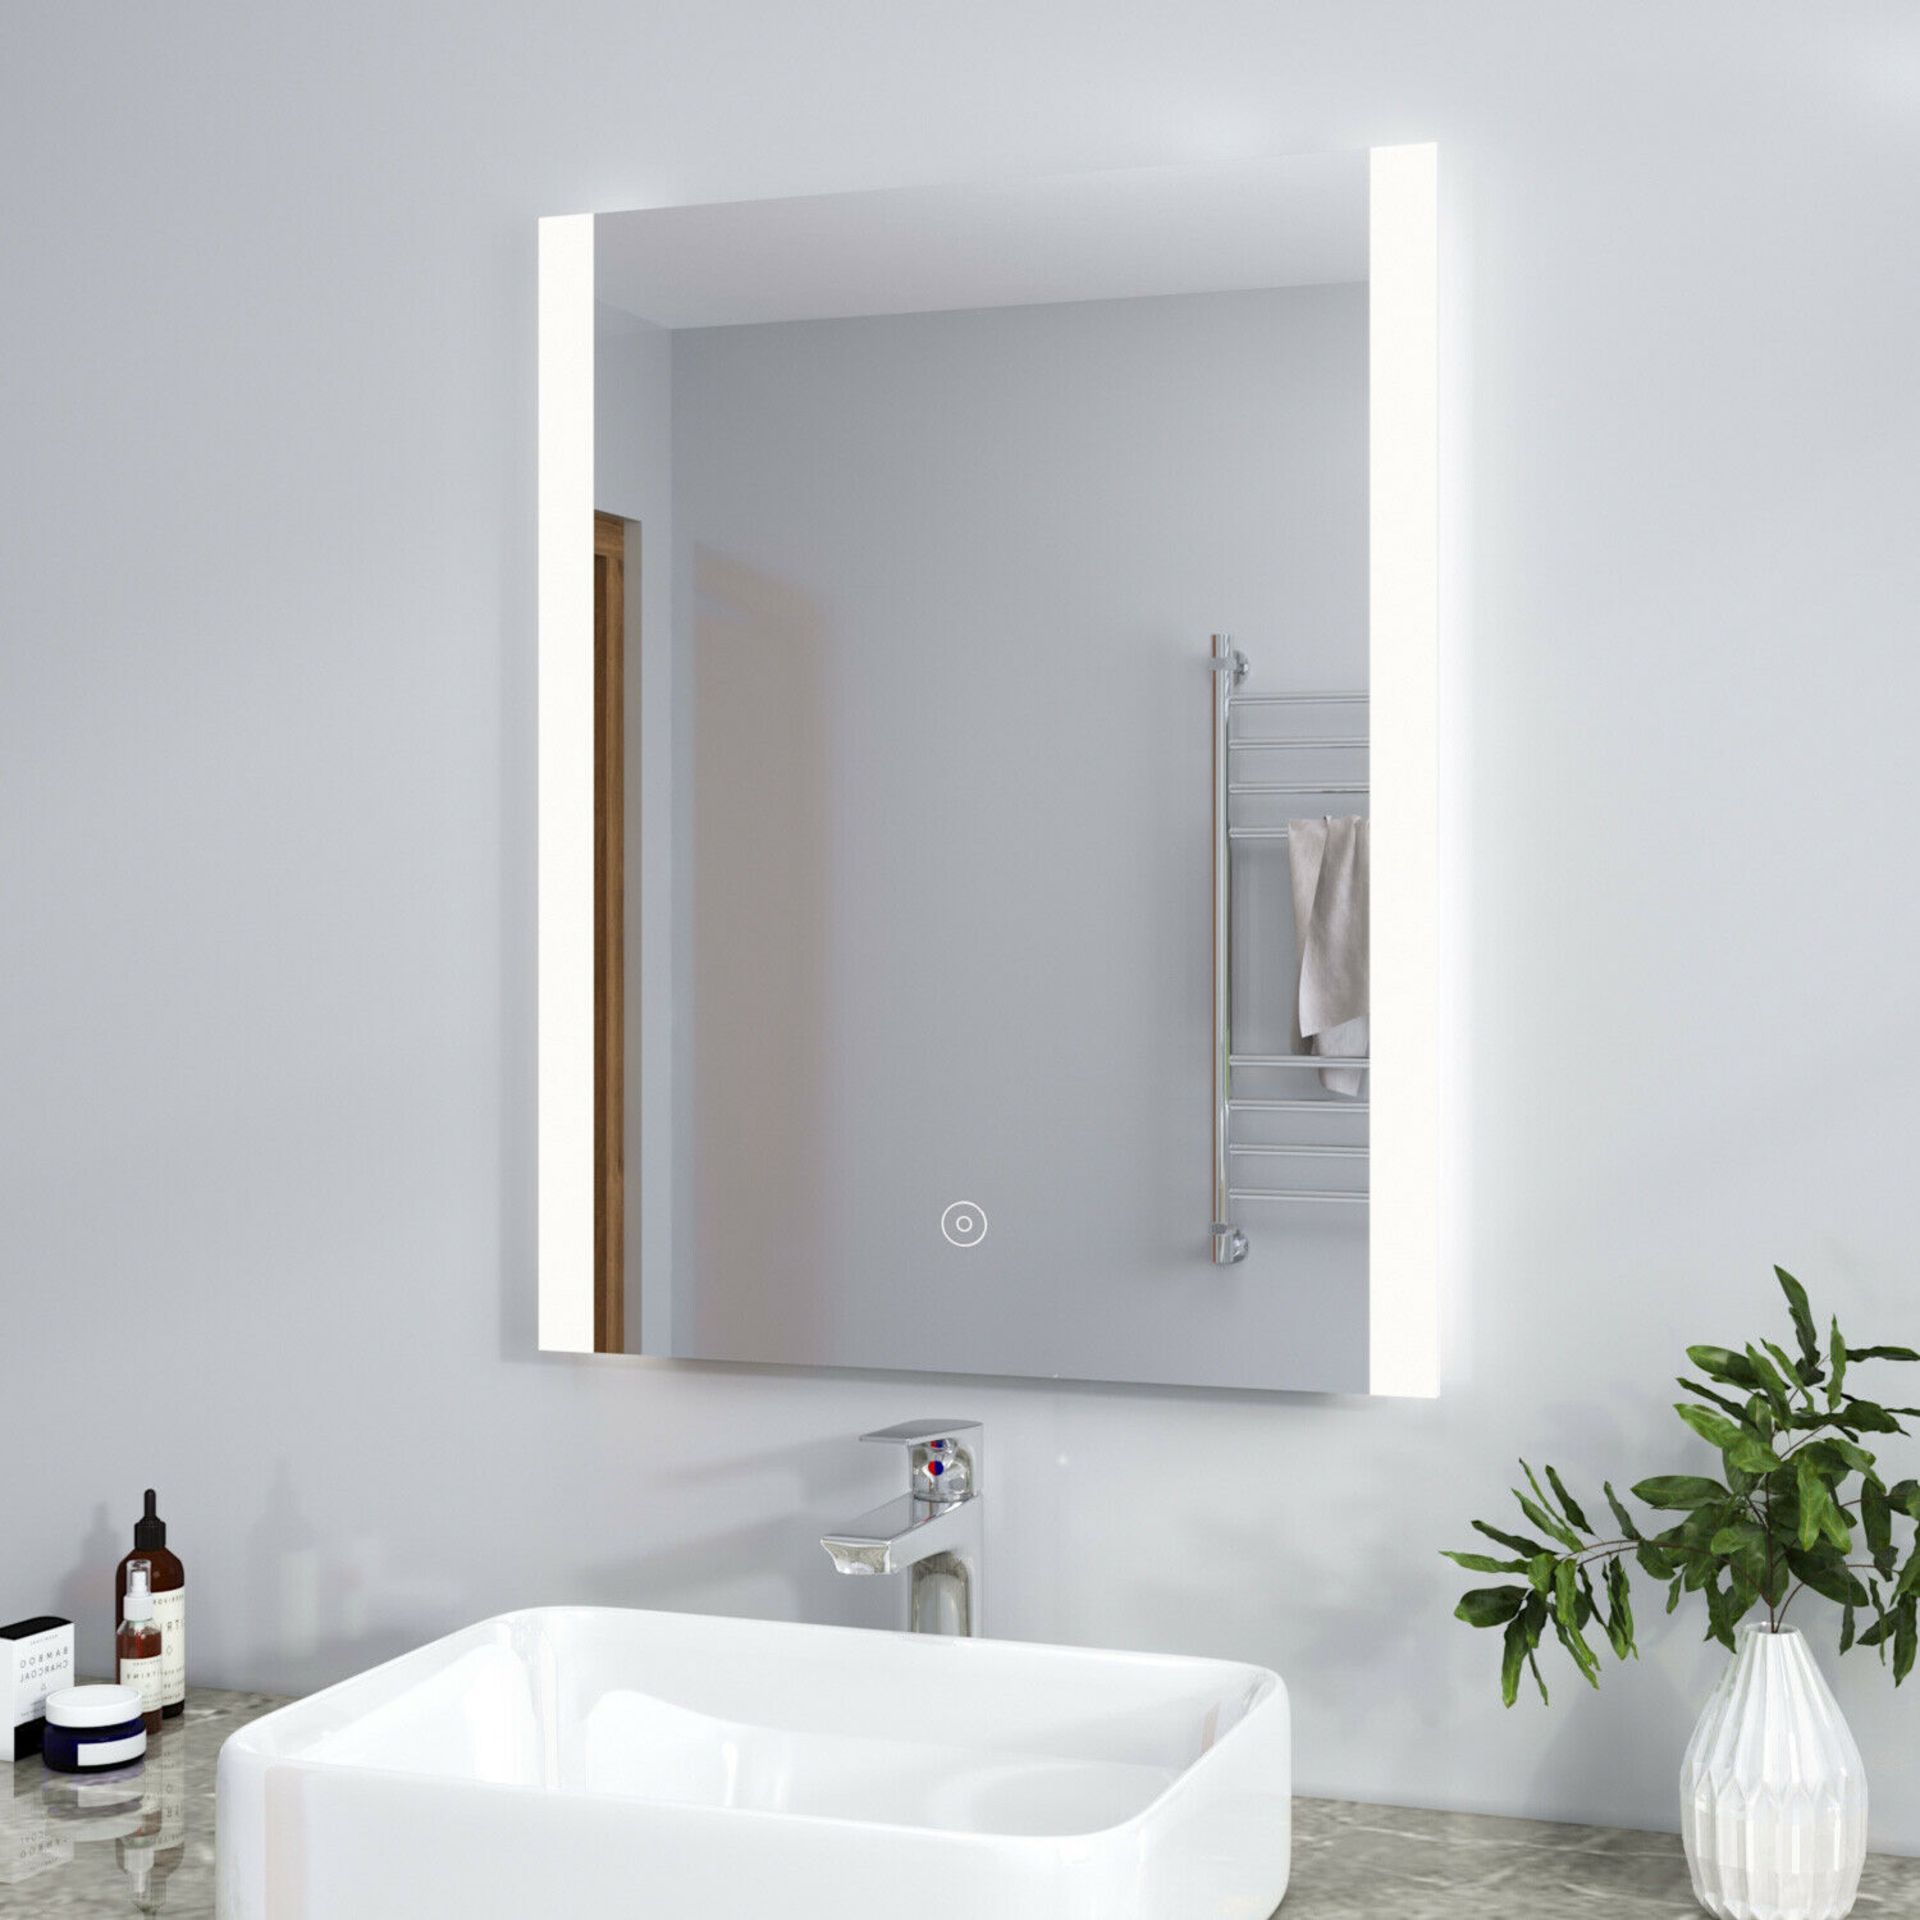 (KN35) 600x800mm Cosmic LED Illuminated Bathroom Mirror. We love this mirror as it provides a w... - Image 4 of 4